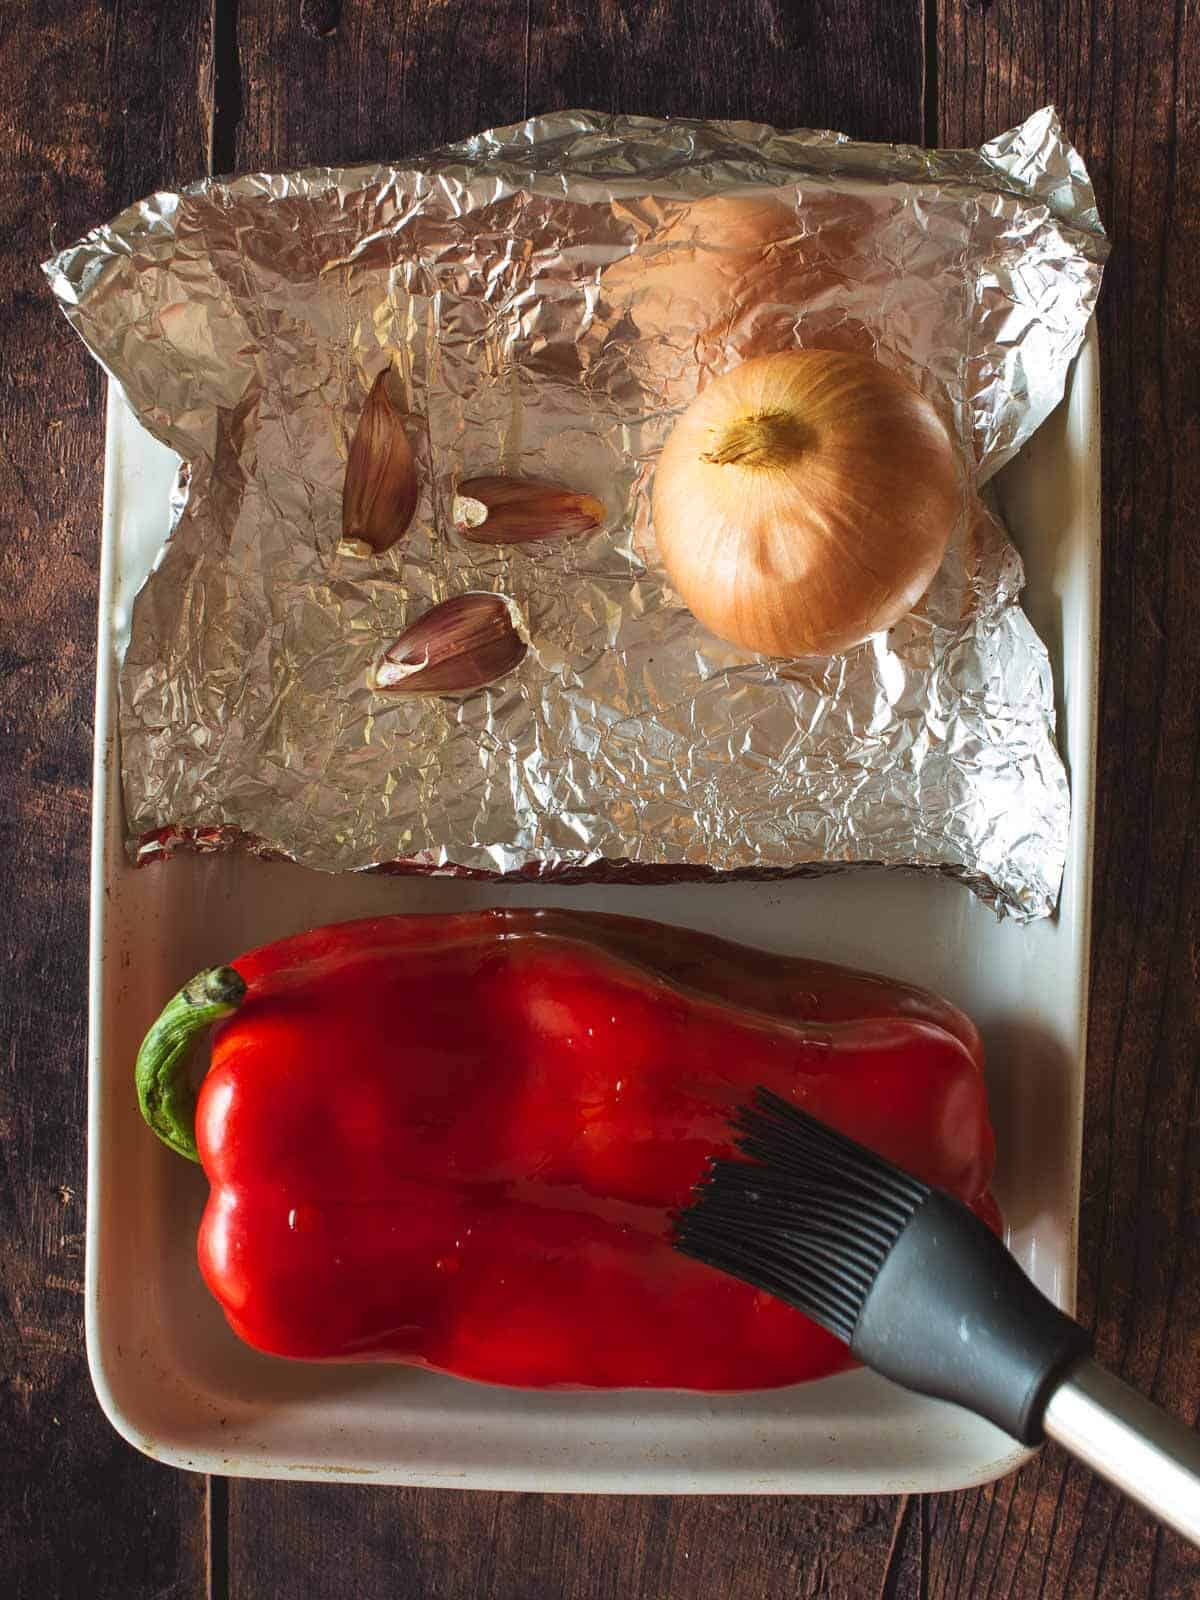 brushing red pepper with olive oil before putting it in the oven, next to an onion and garlic cloves on aluminium foil.